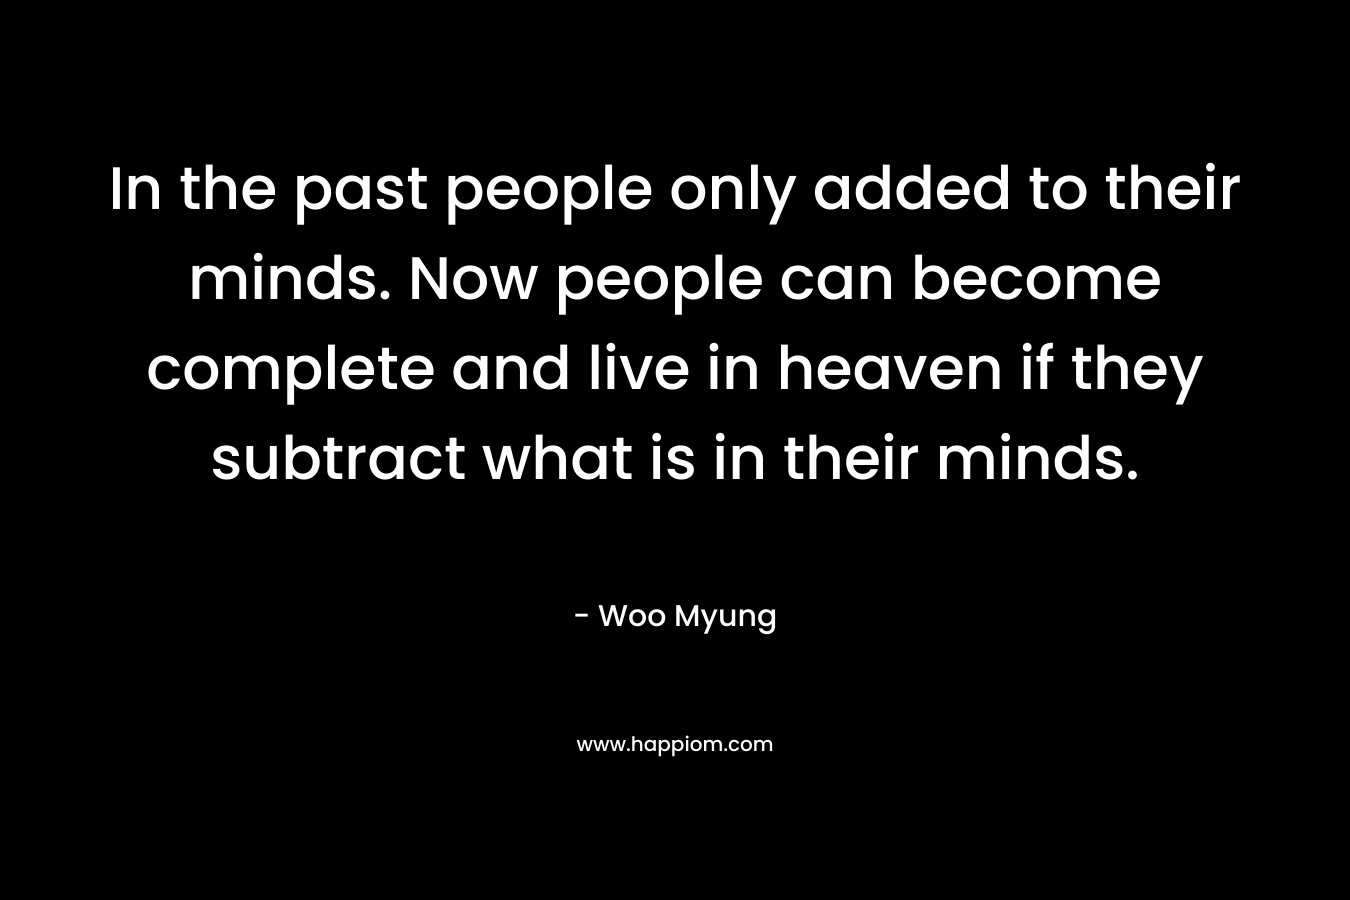 In the past people only added to their minds. Now people can become complete and live in heaven if they subtract what is in their minds.